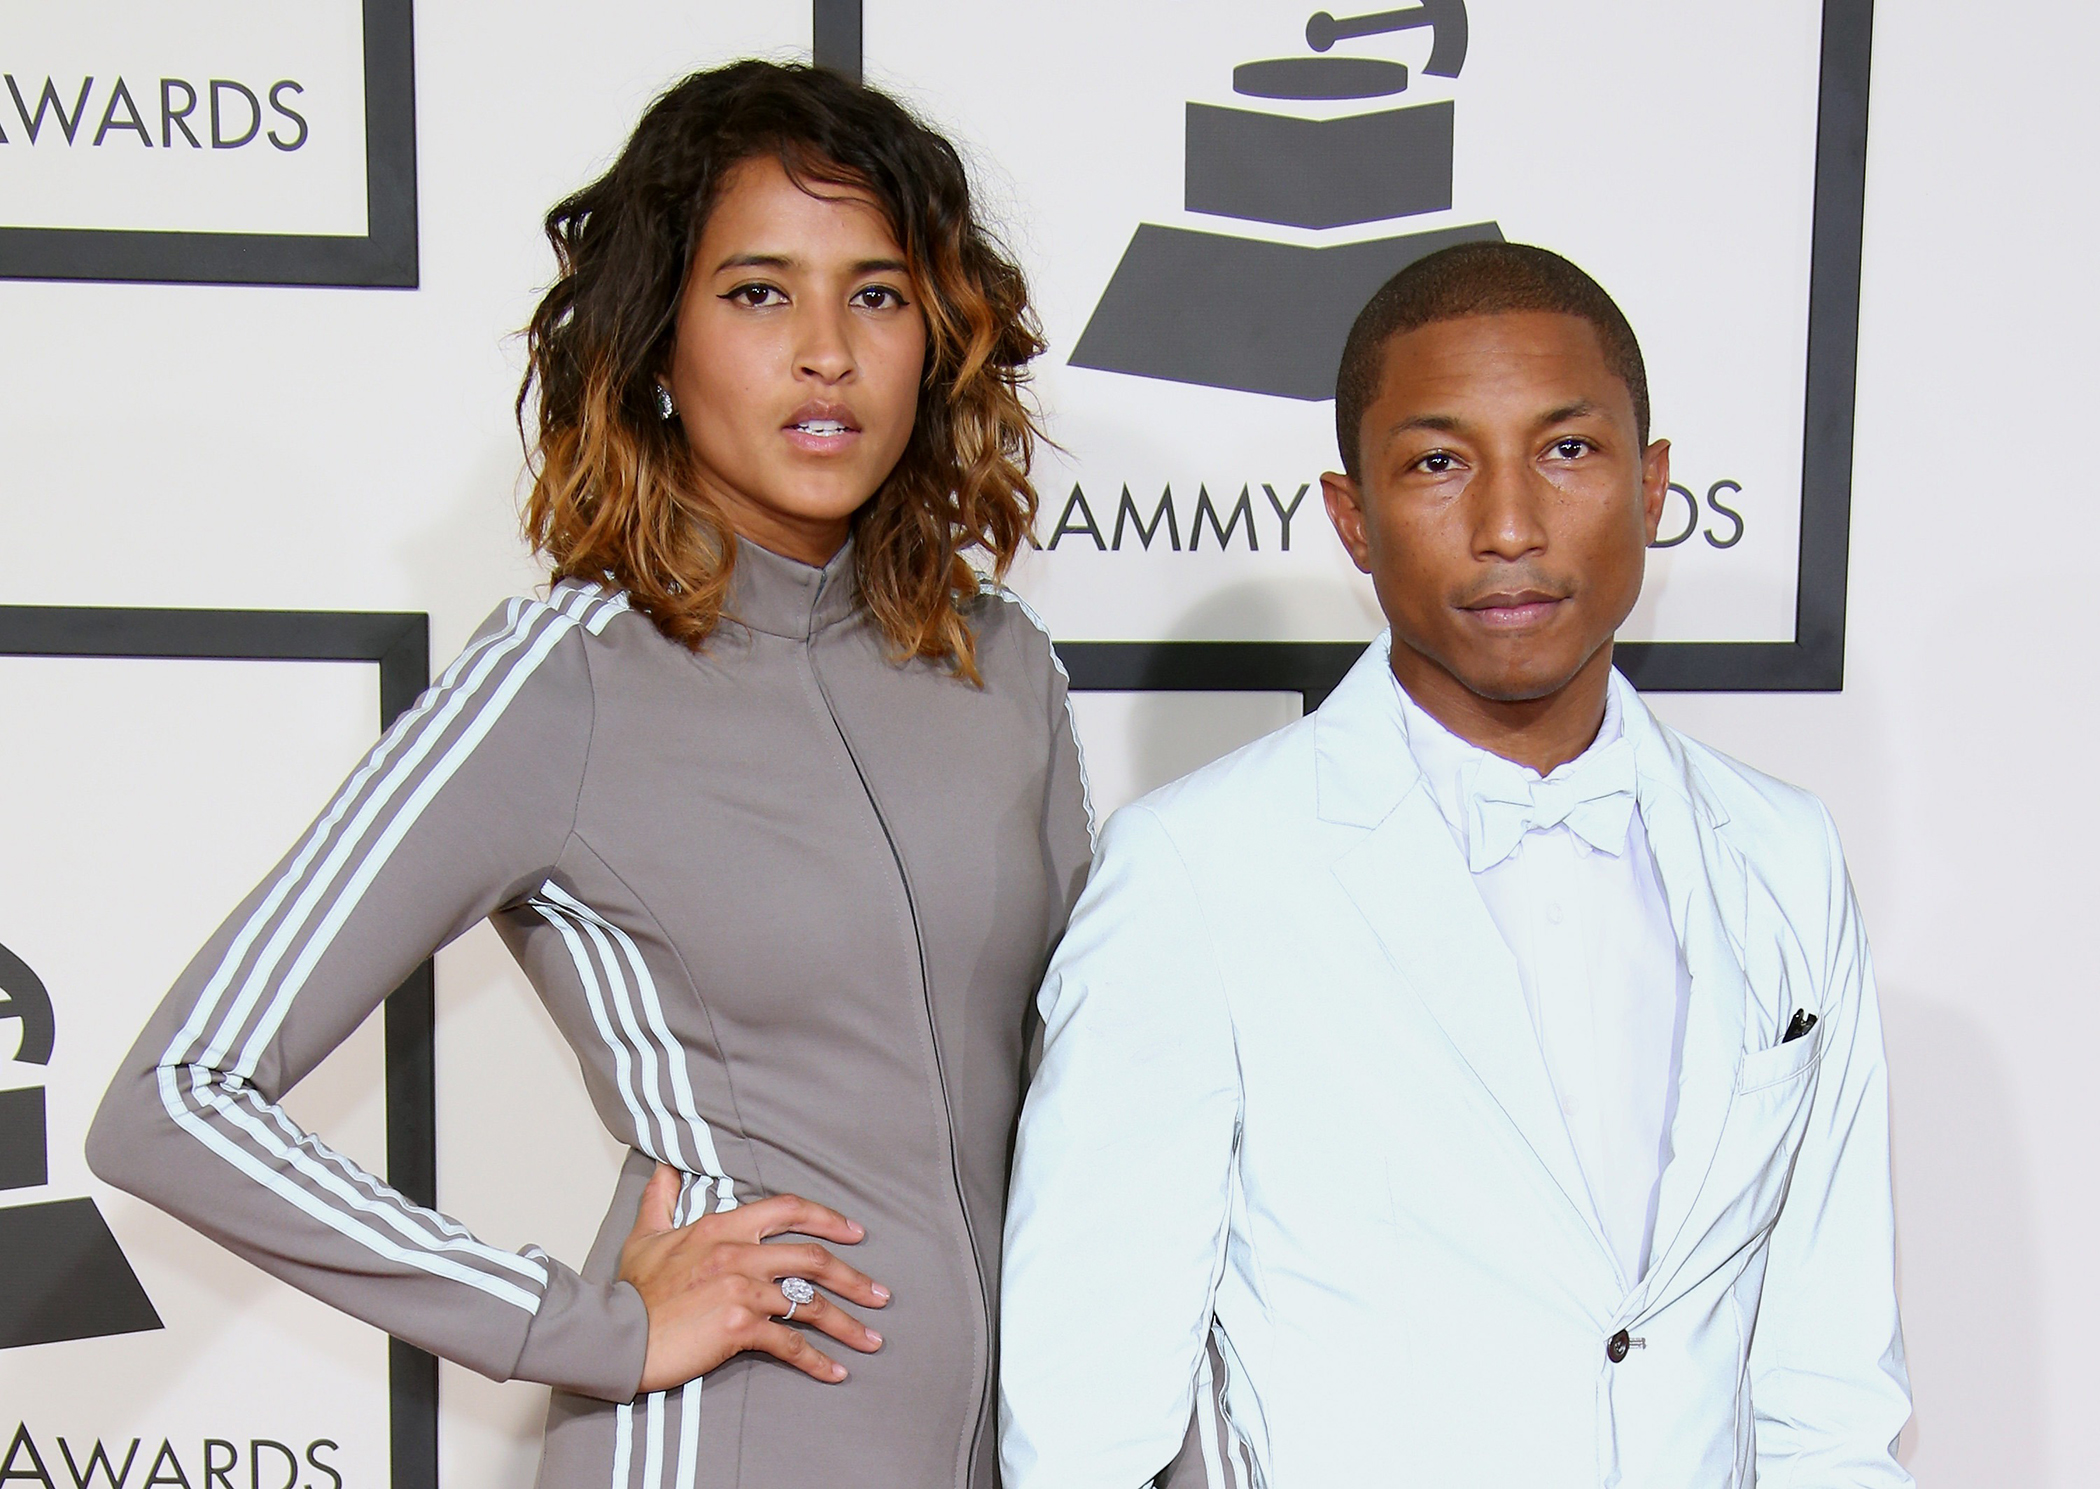 (L-R) Helen Lasichanh and Pharrell Williams attend The 57th Annual GRAMMY Awards at the STAPLES Center on February 8, 2015 in Los Angeles, California.